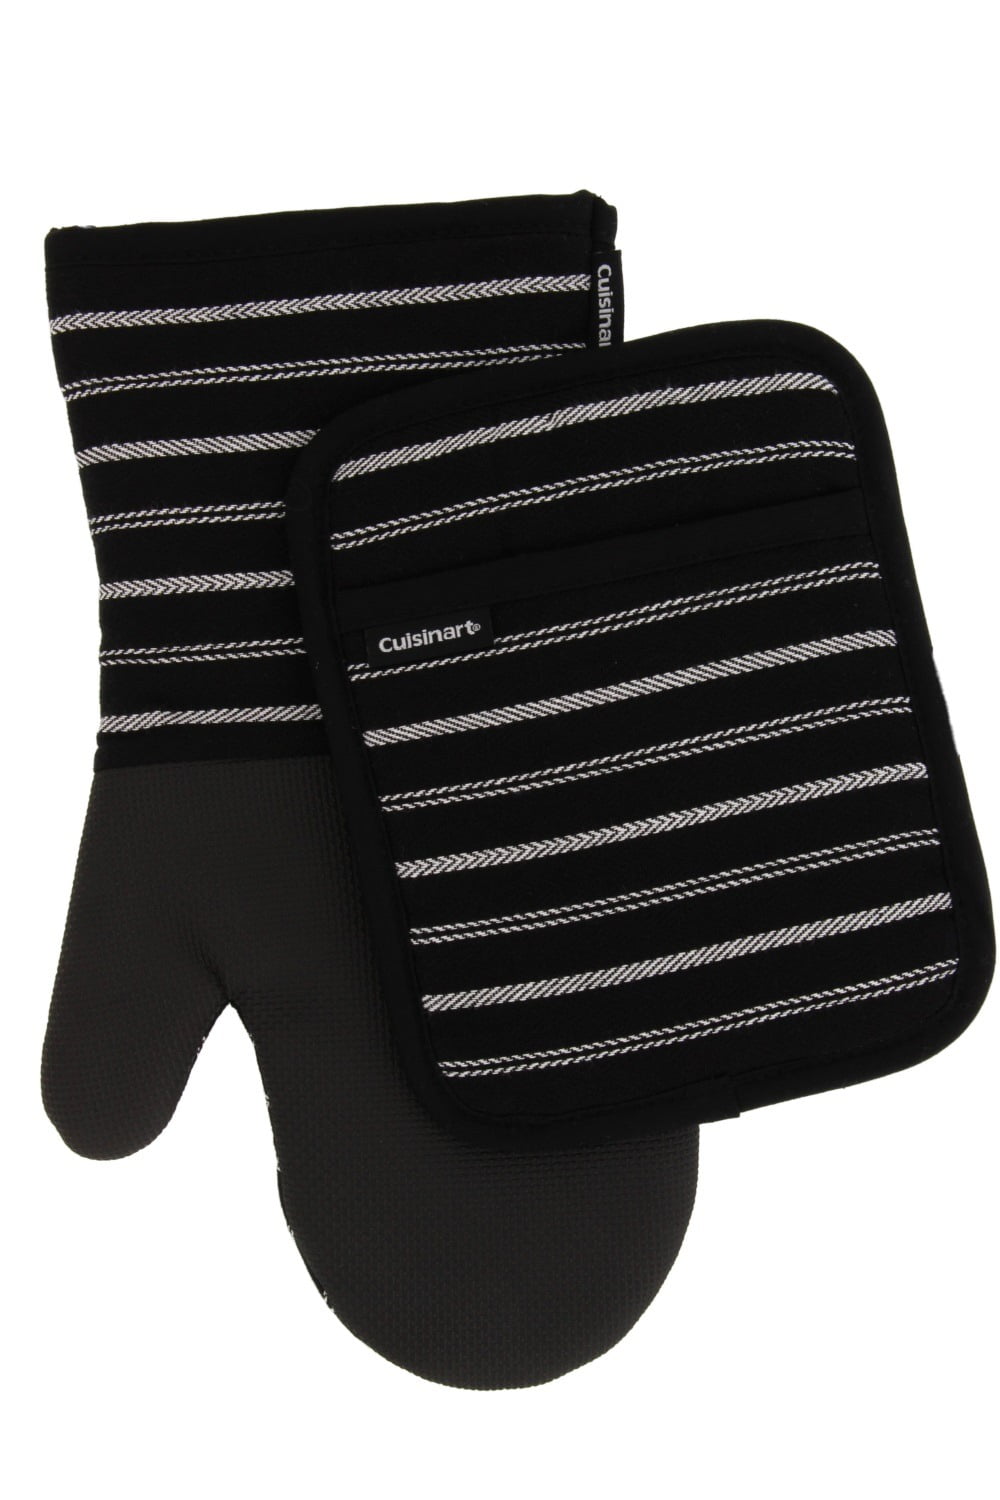 Neoprene Mini Oven Mitts, 2 Pack Heat Resistant Gloves Potholder to Protect Hands with Non-Slip Grip Surfaces and Hanging Loop for Handling Hot Pot